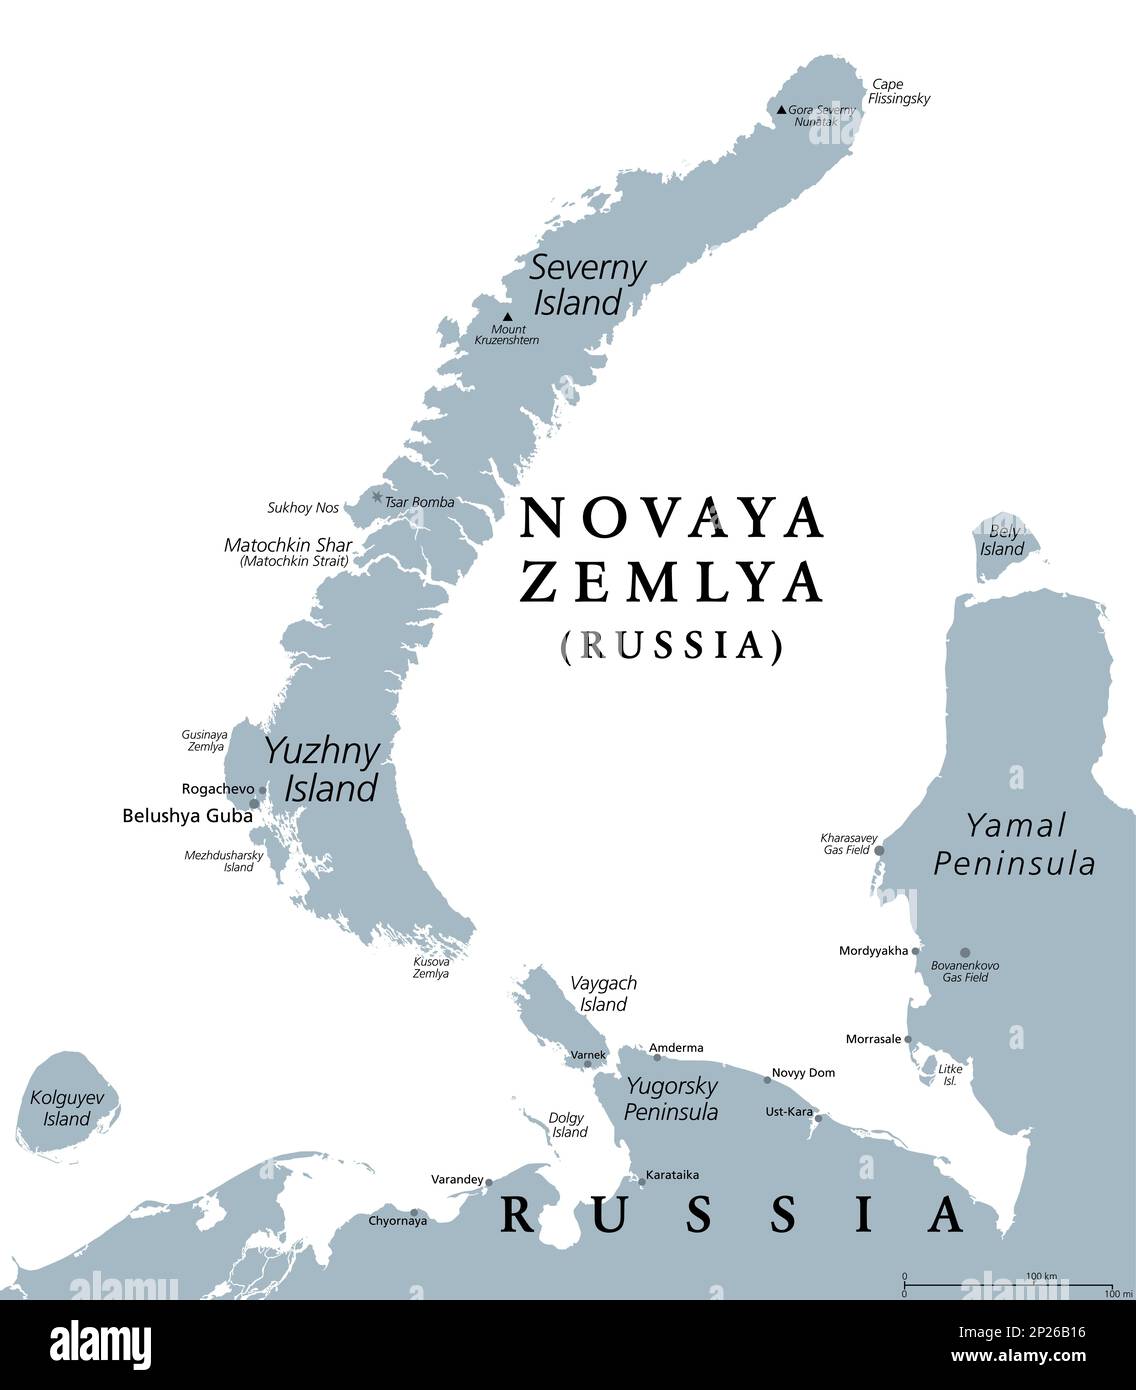 Novaya Zemlya, archipelago in northern Russia, gray political map. Situated in the Arctic Ocean, consisting of Severny Island and Yuzhny Island. Stock Photo